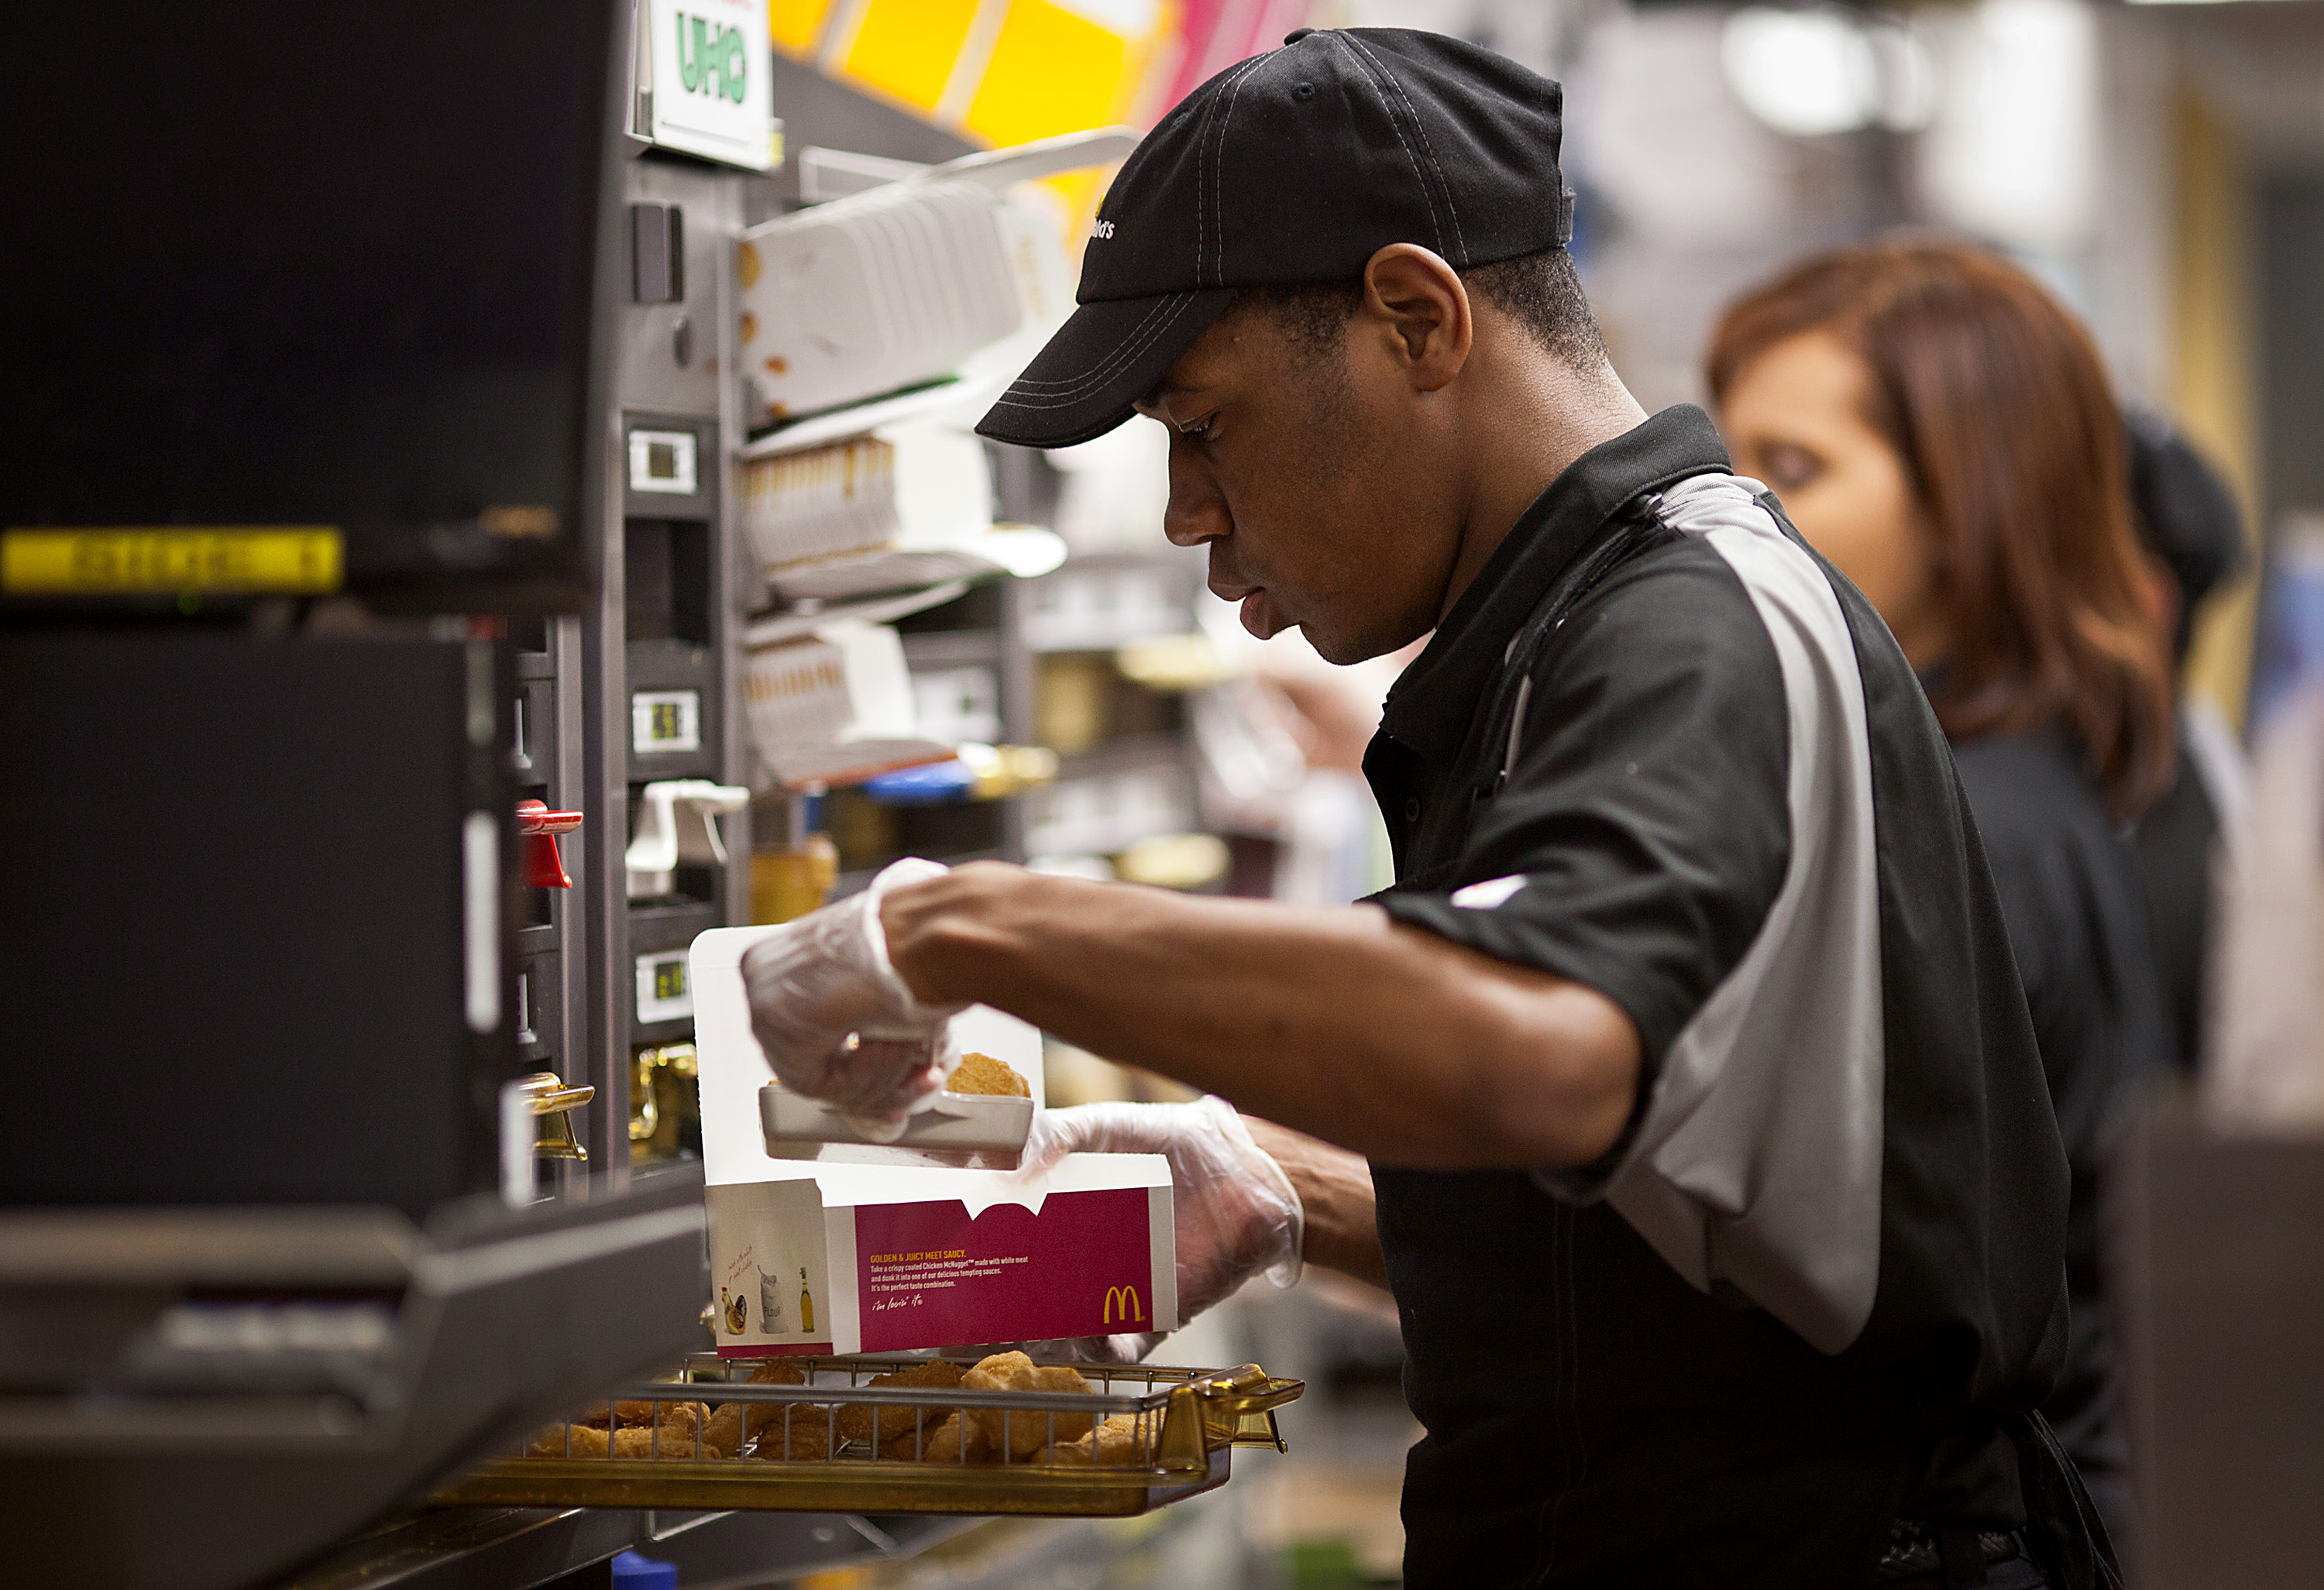 How I Get By: A Week in the Life of a McDonald’s Cashier | Vice